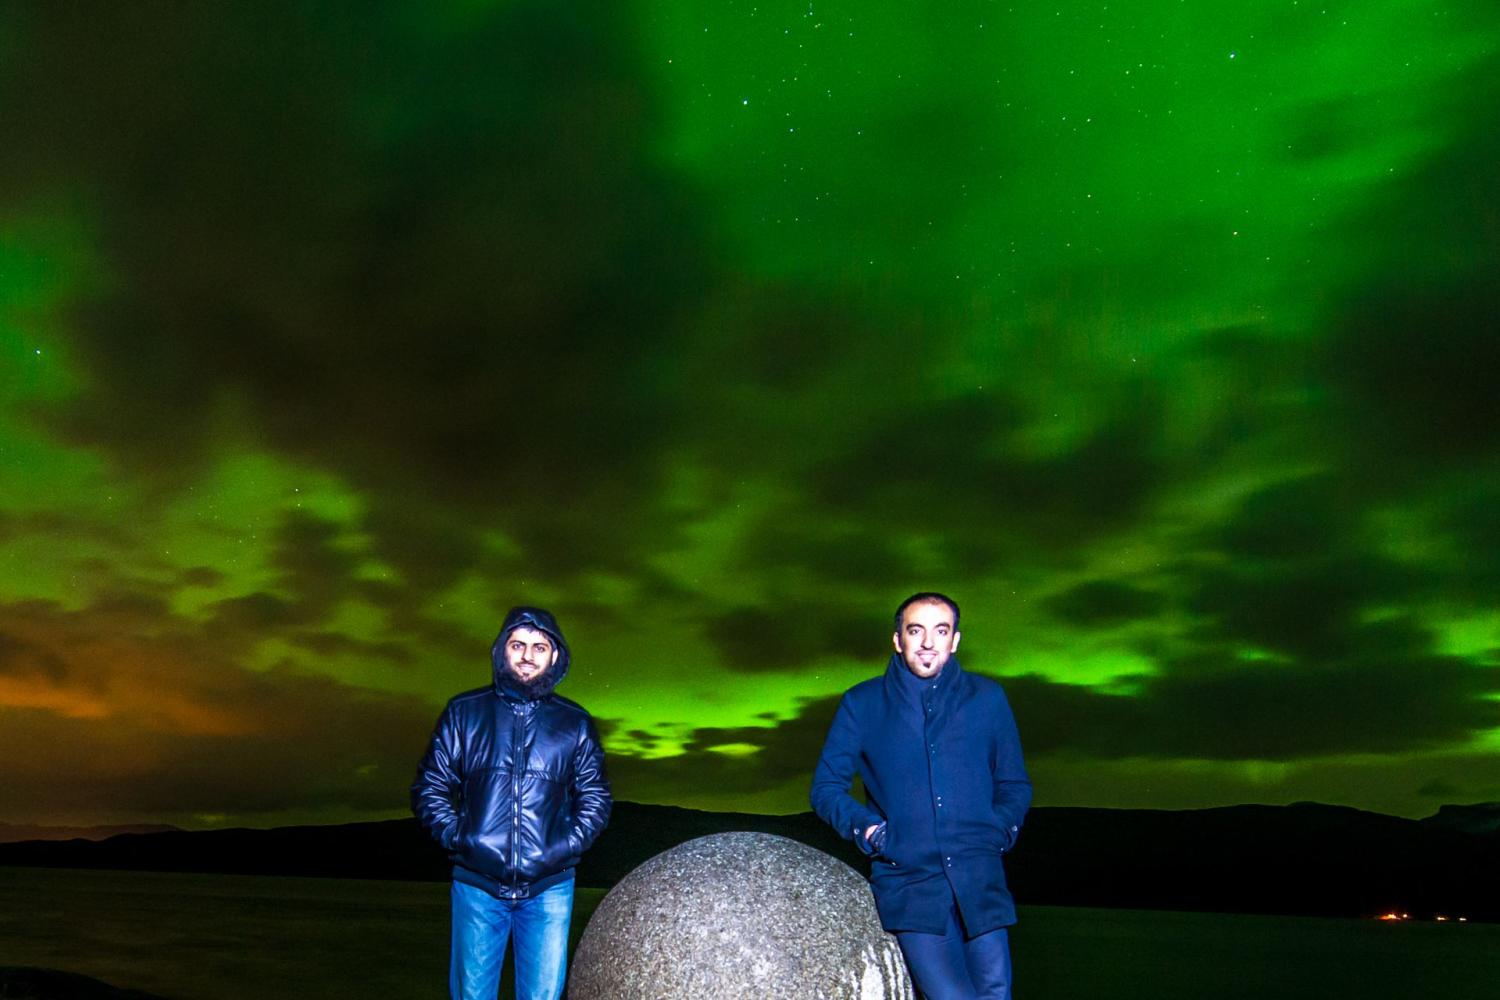 The Northern Lights in Narvik